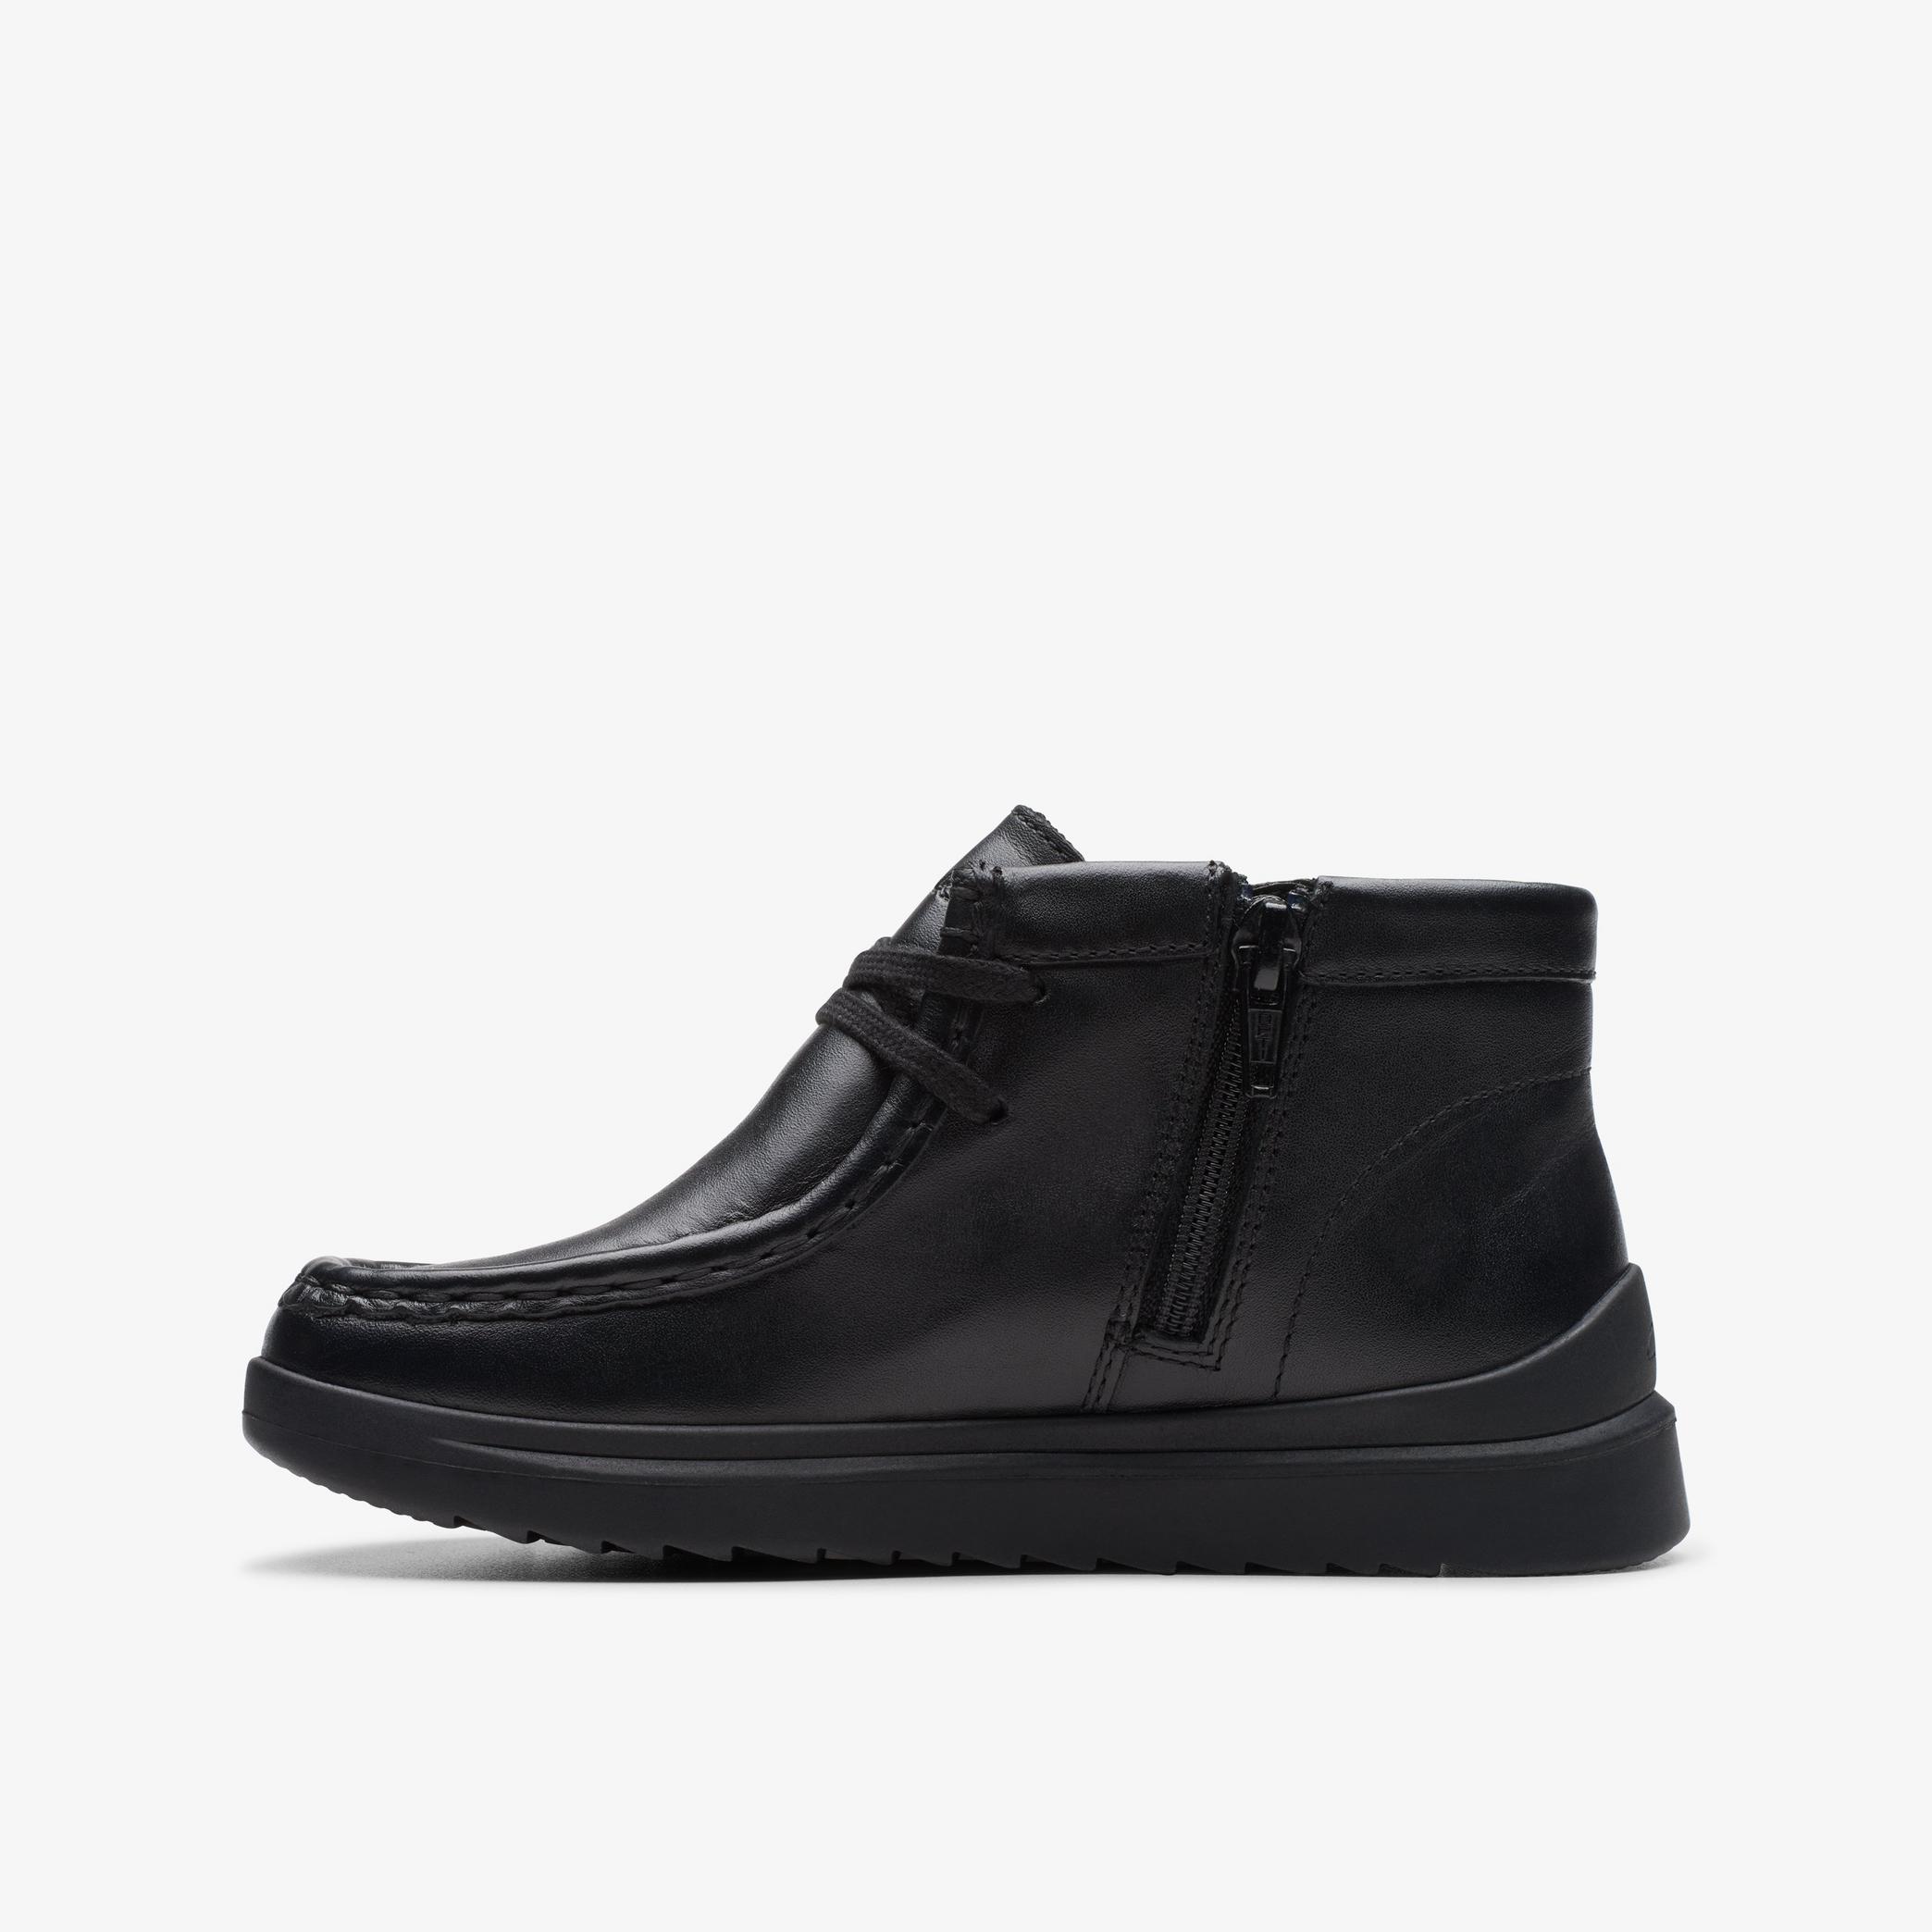 BOYS Goal Wally Kid Black Leather Ankle Boots | Clarks UK